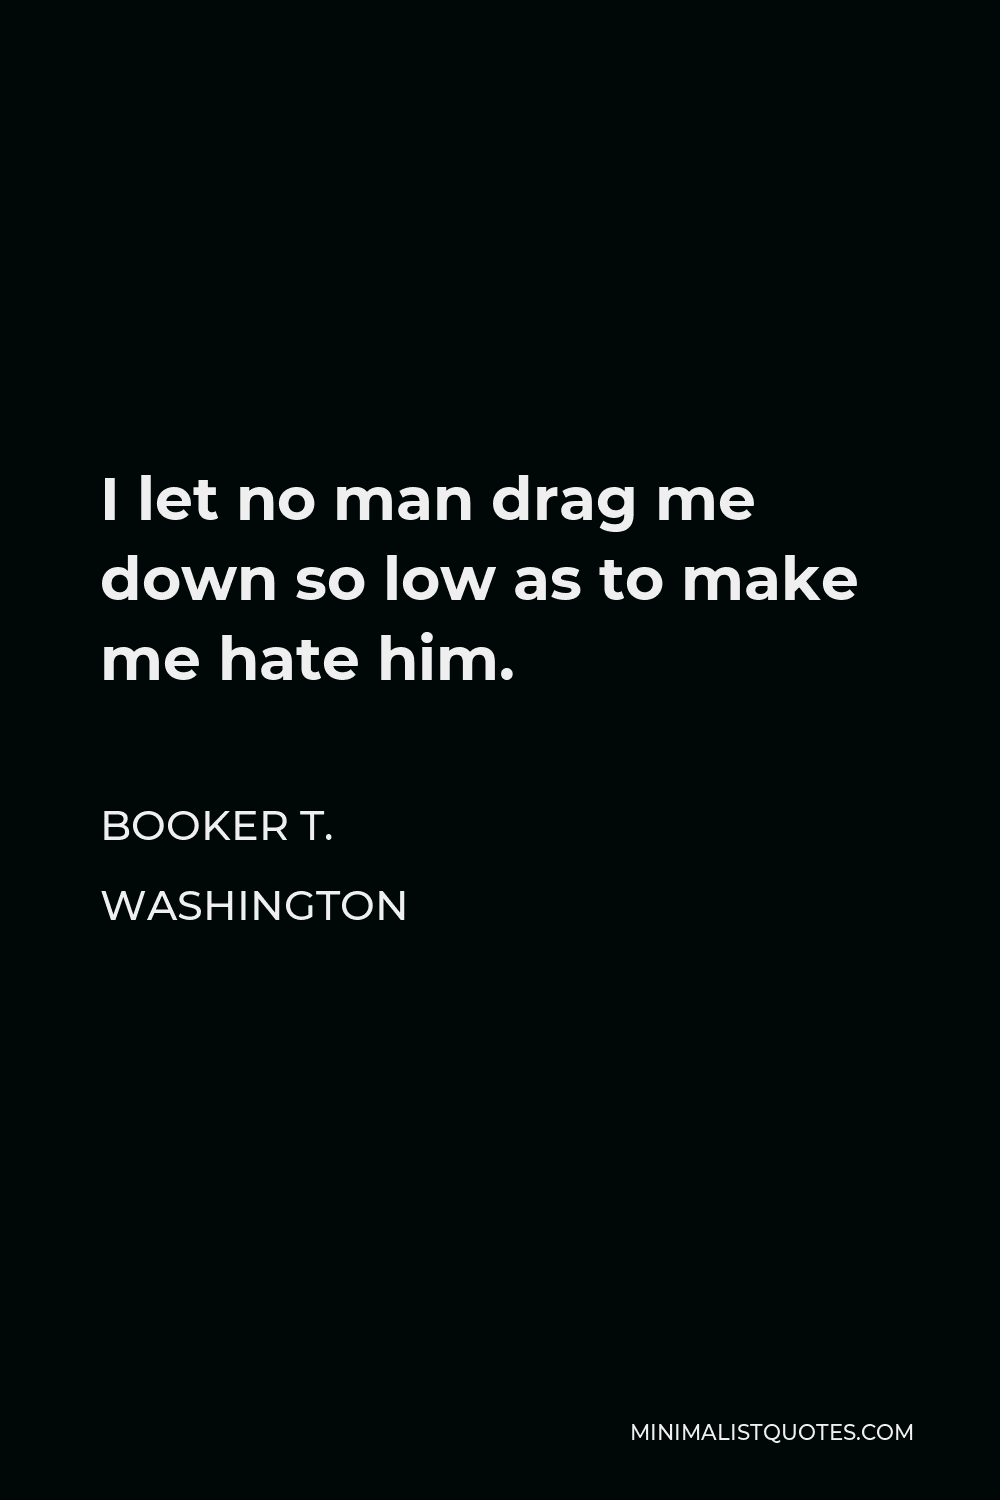 Booker T. Washington Quote - I let no man drag me down so low as to make me hate him.